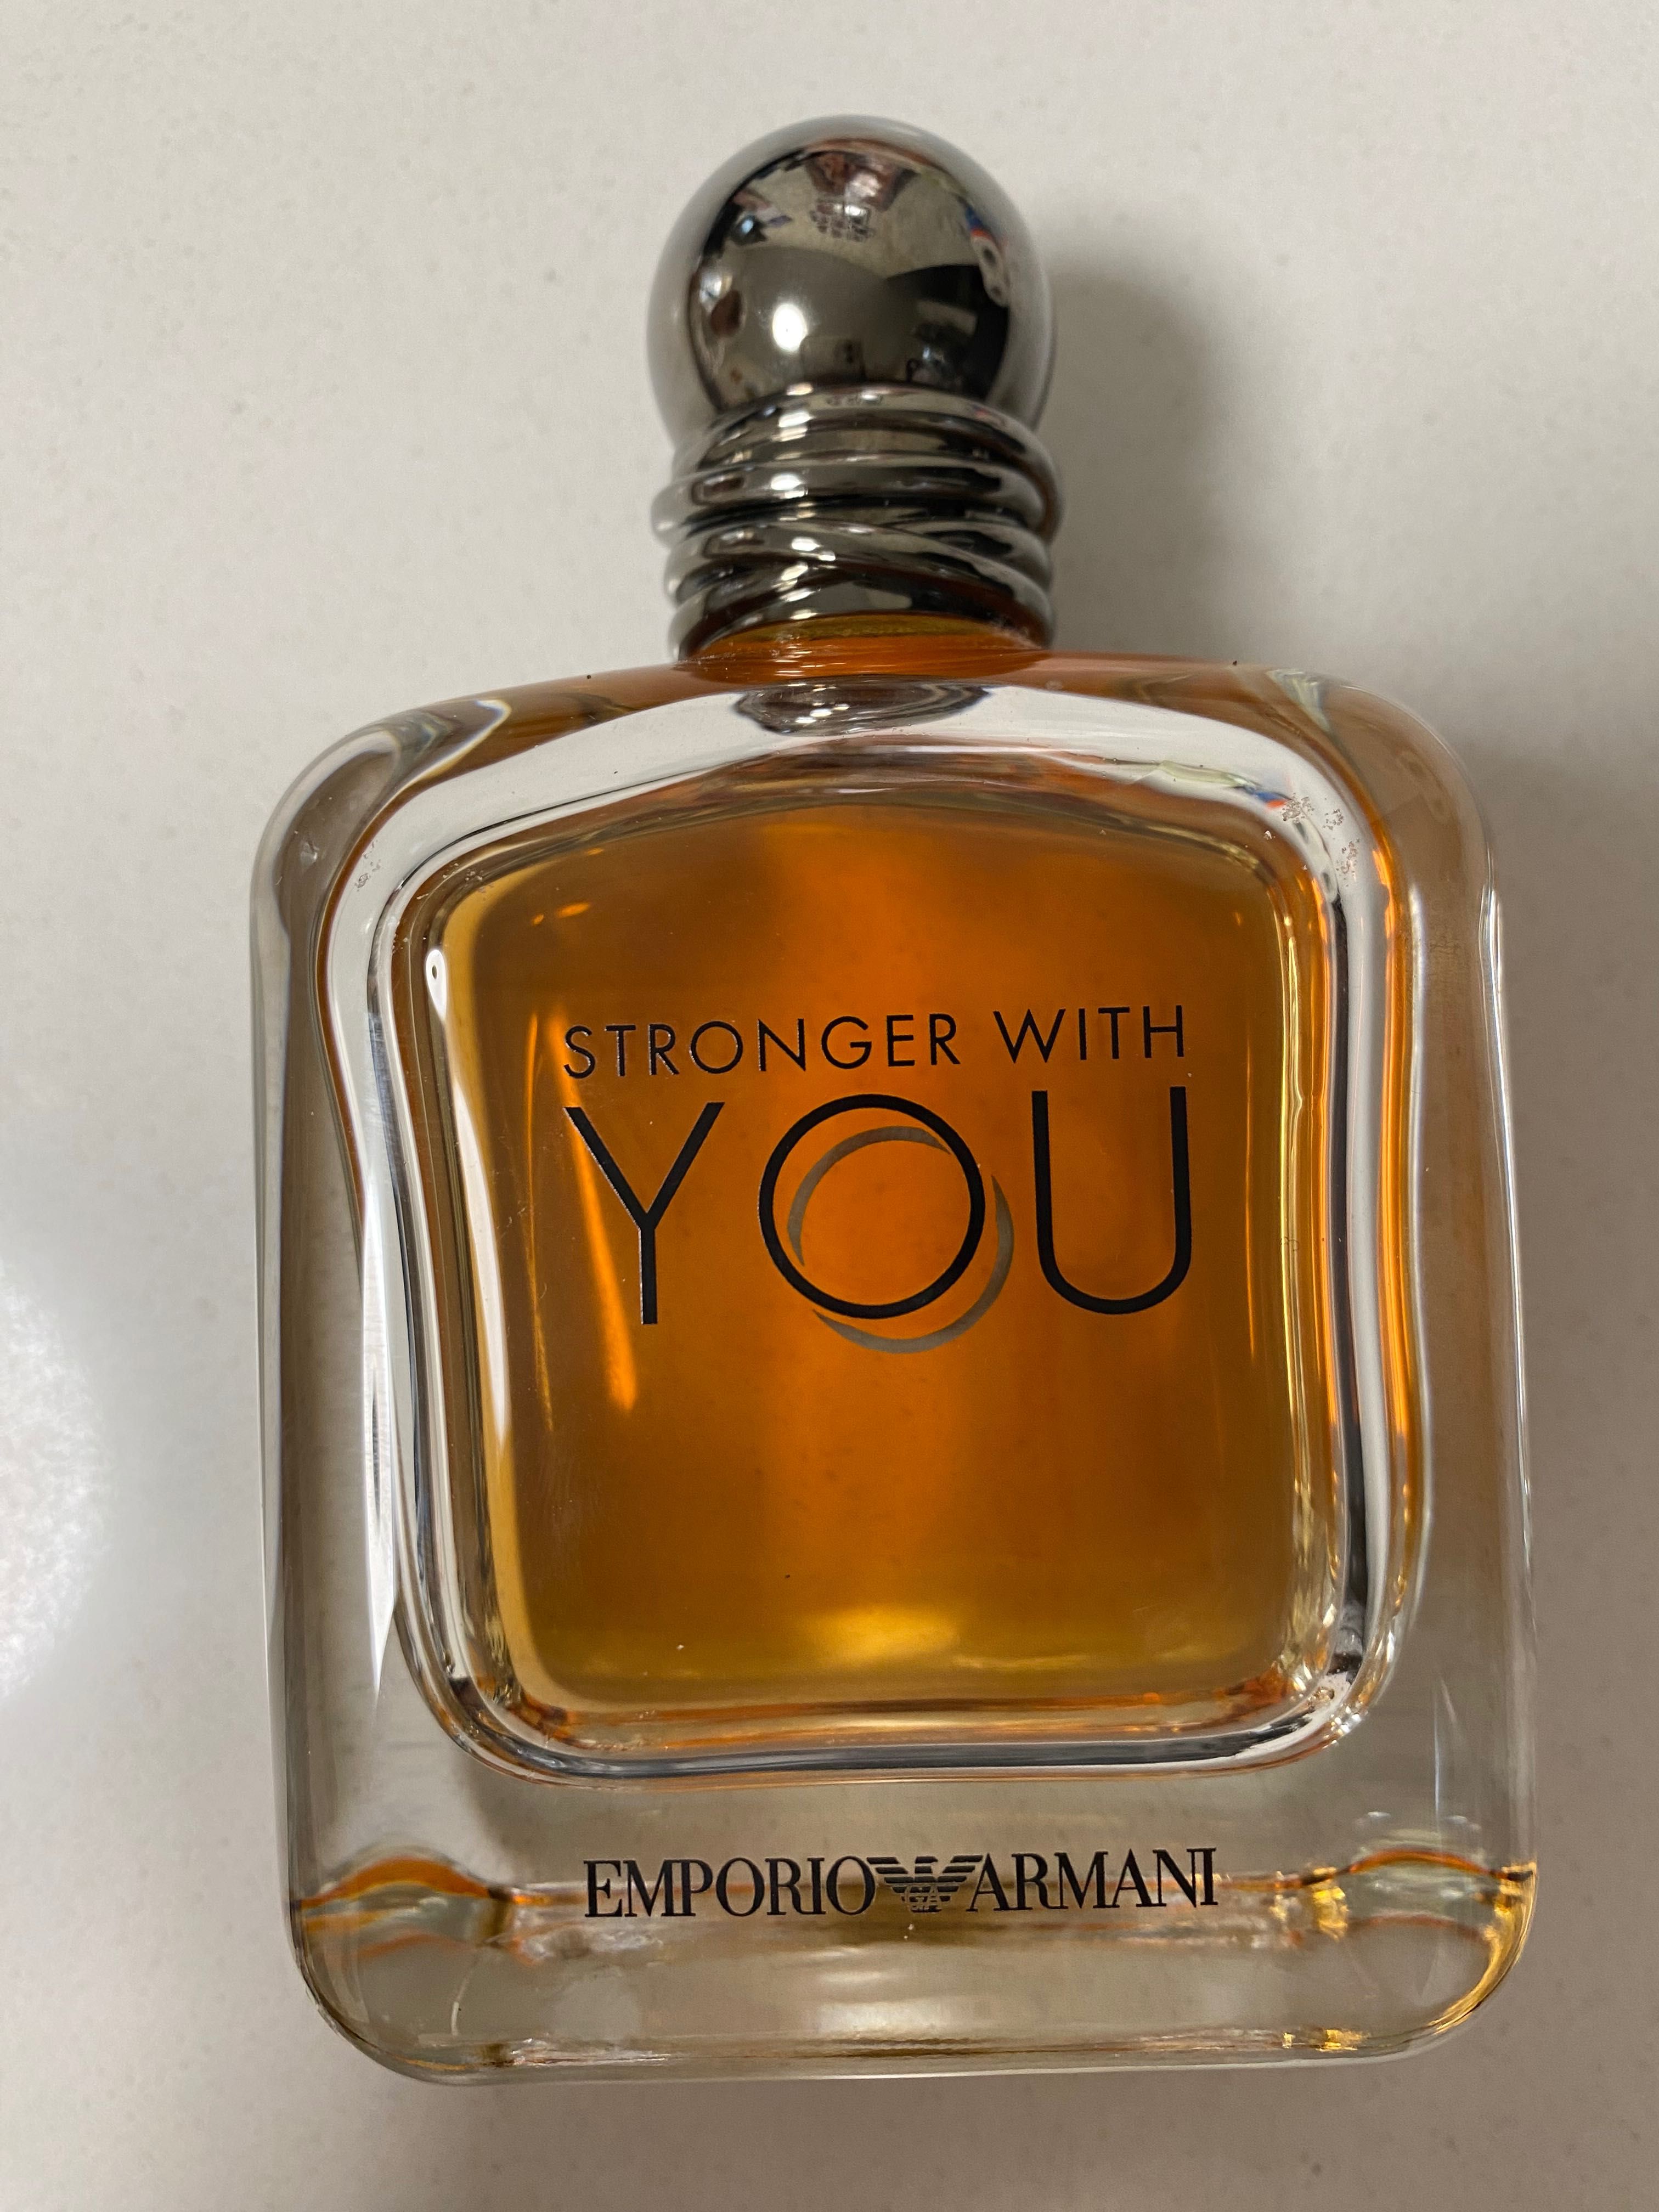 Armani Stronger with you